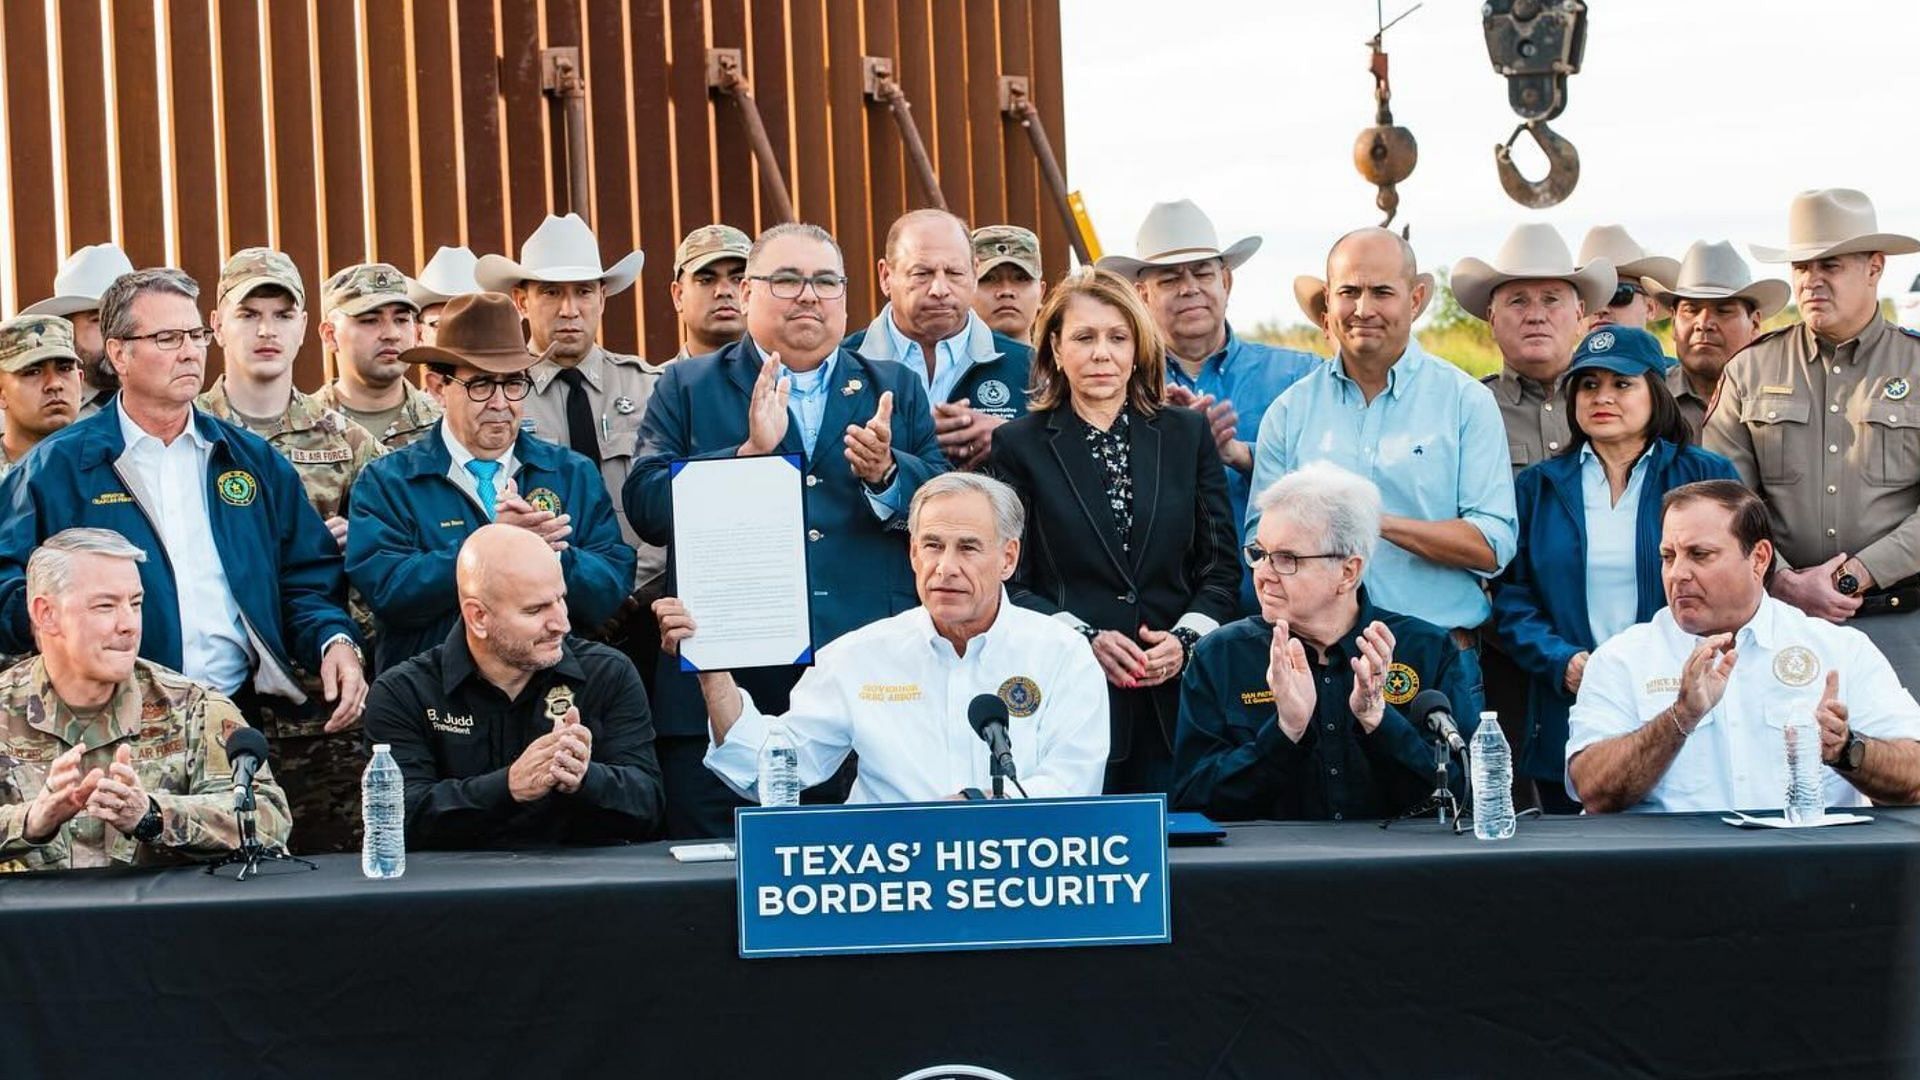 Judge blocks the enforcement of SB4, the controversial Texas immigration law (Image via Instagram/@governorabbott)